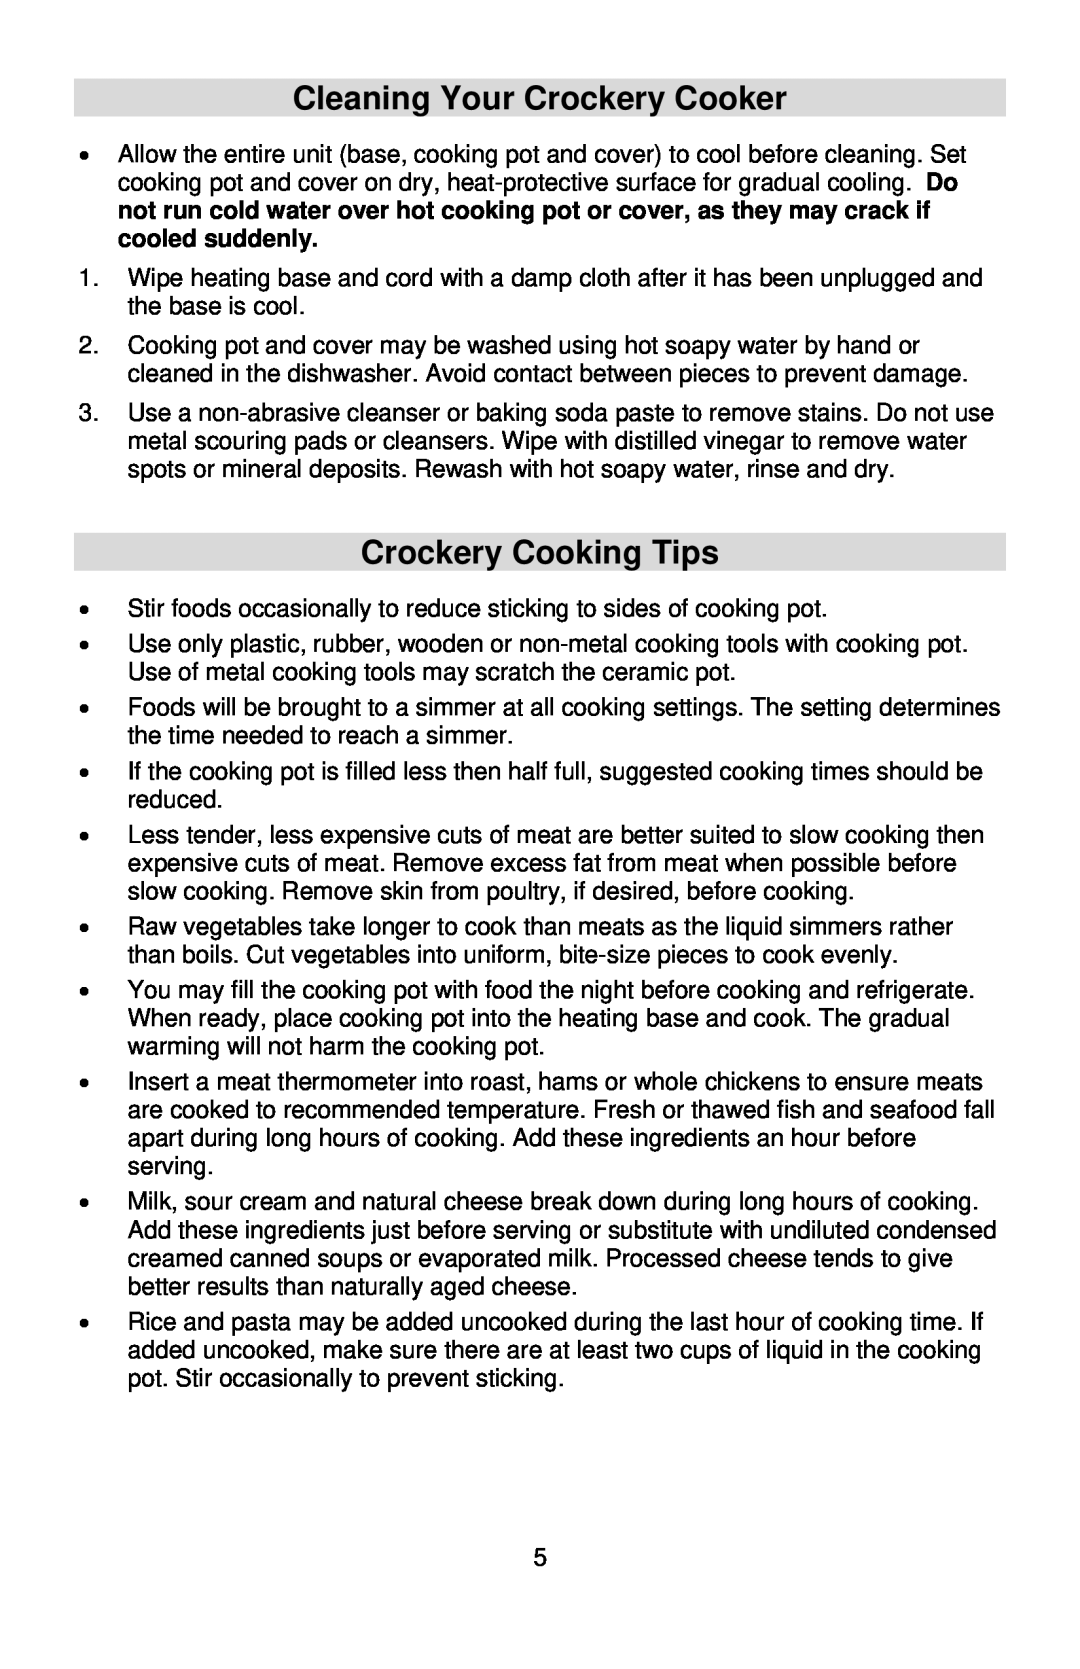 West Bend instruction manual Cleaning Your Crockery Cooker, Crockery Cooking Tips 